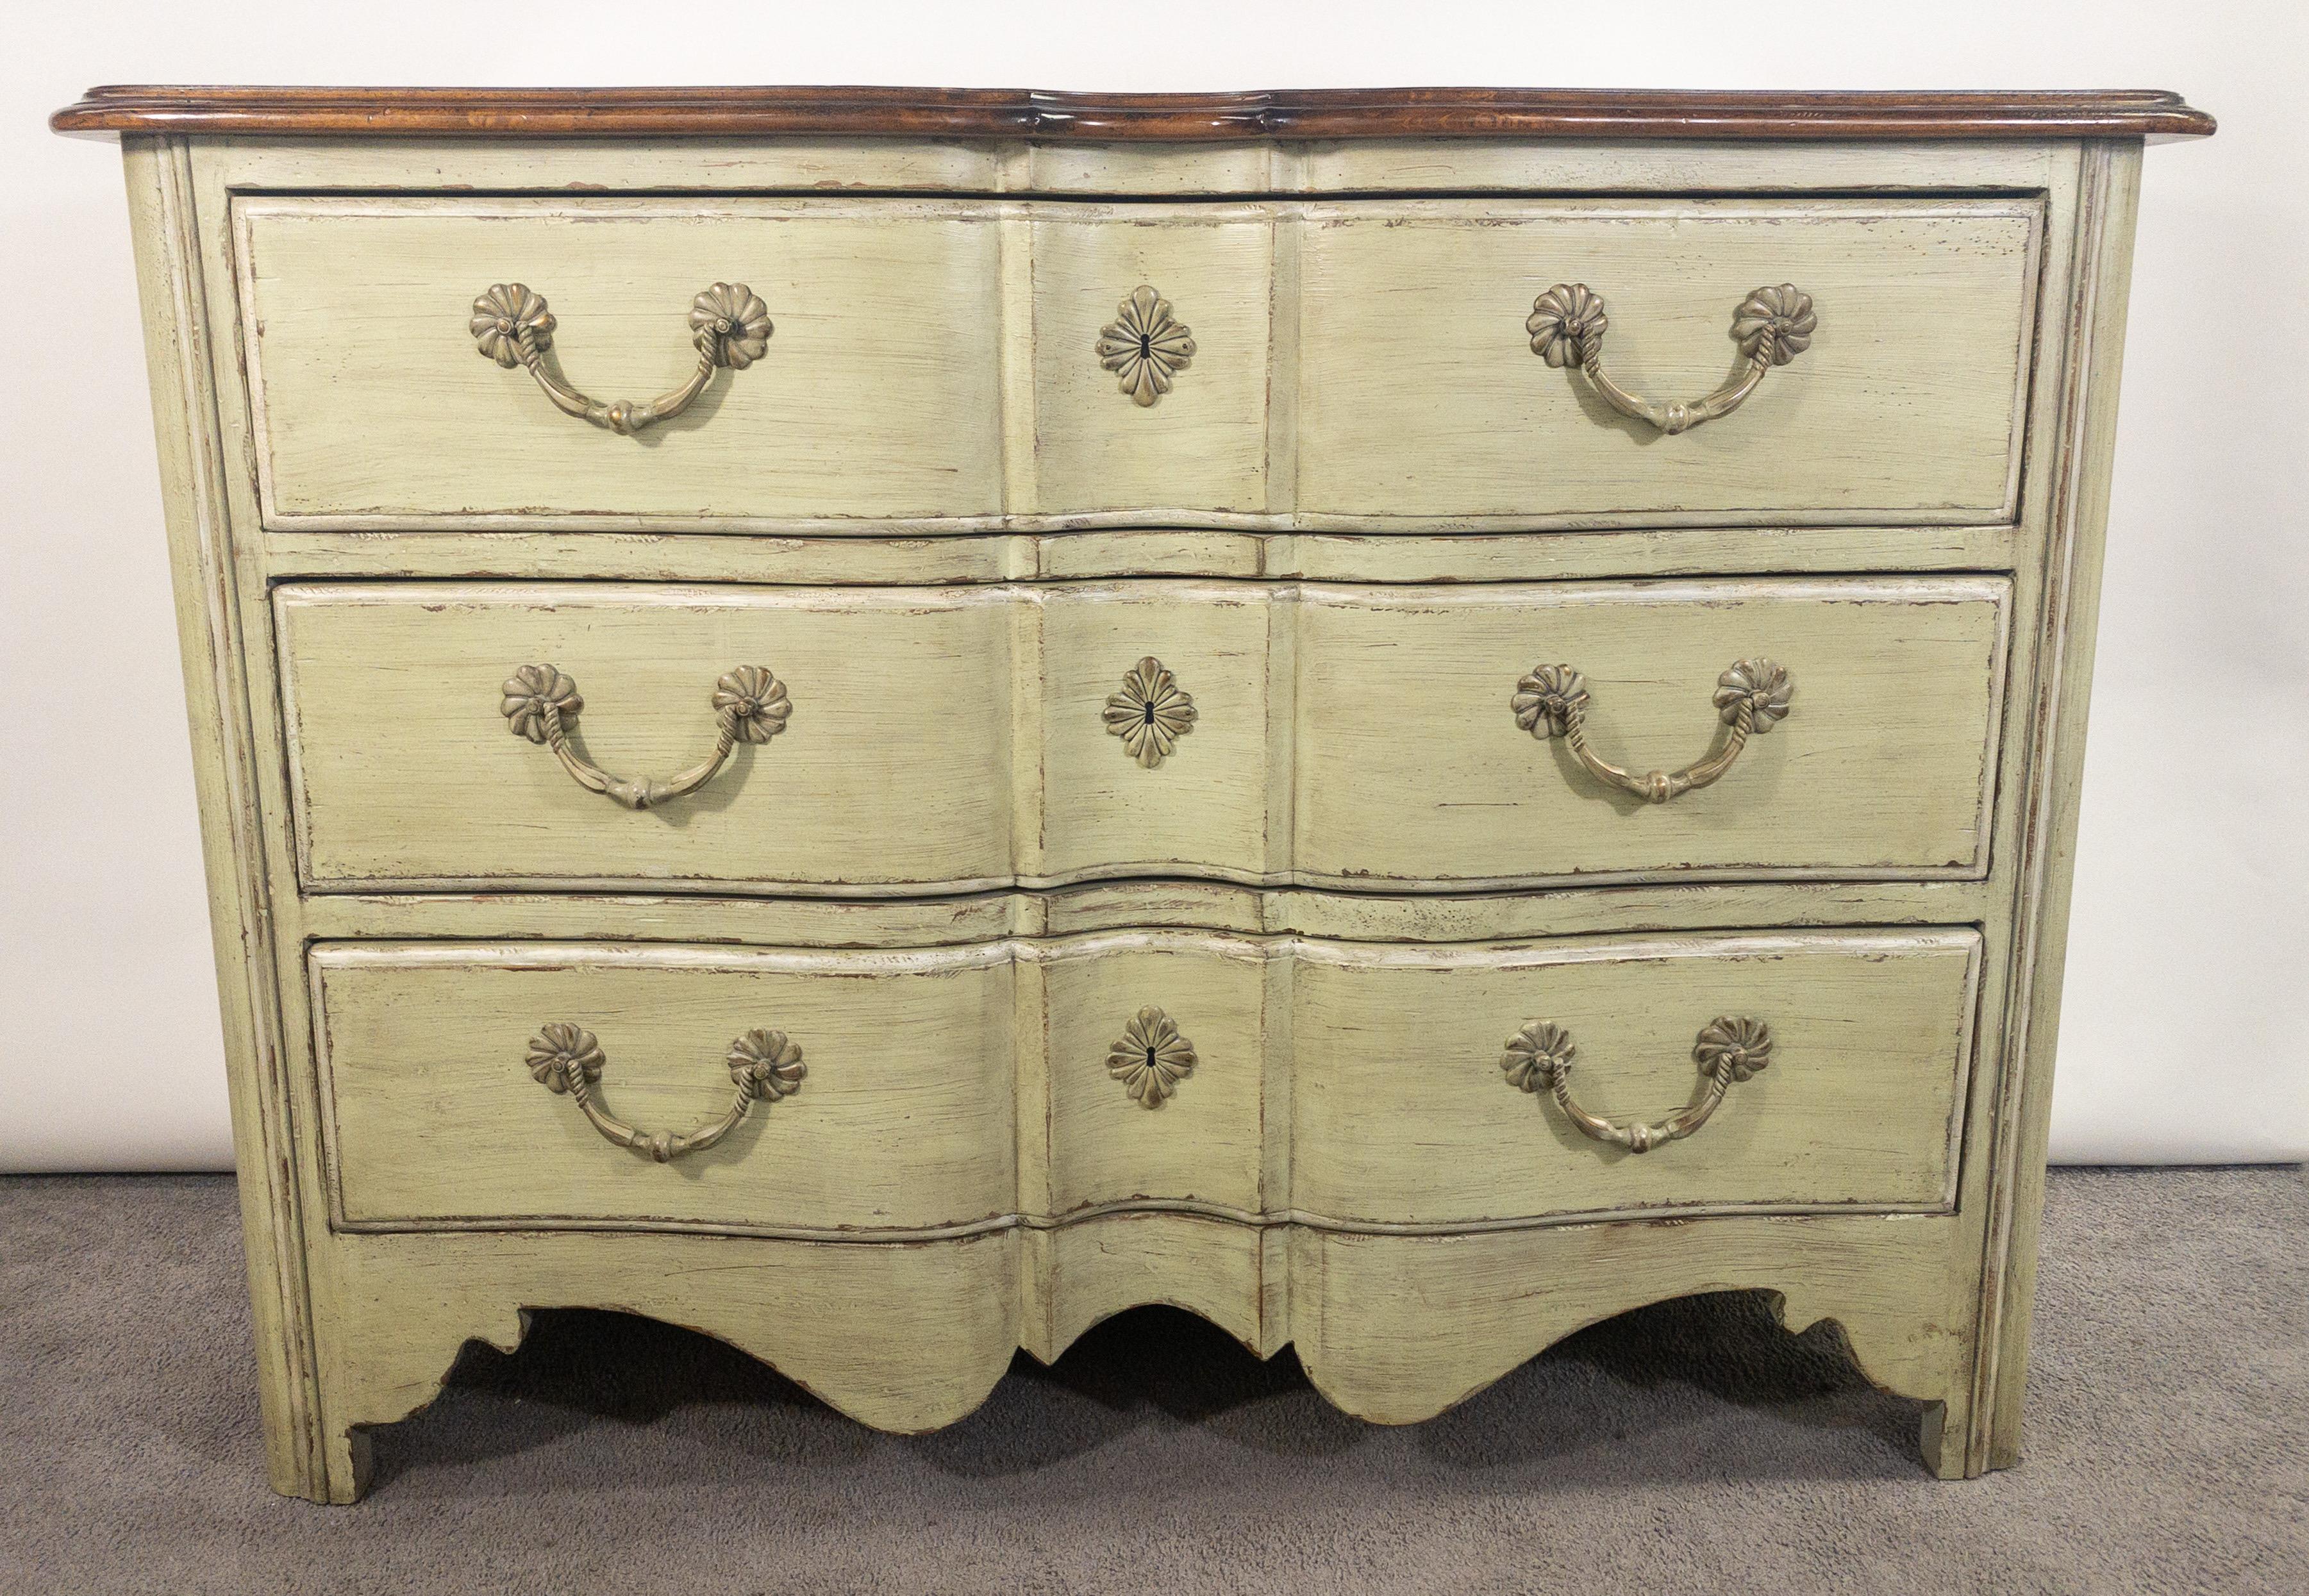 A French provincial style commode or chest having three large drawers. The quality commode is made by Walter E Smith and is marked inside the first drawer. The commode or chest features a beautiful light green color and a solid mahogany top with two